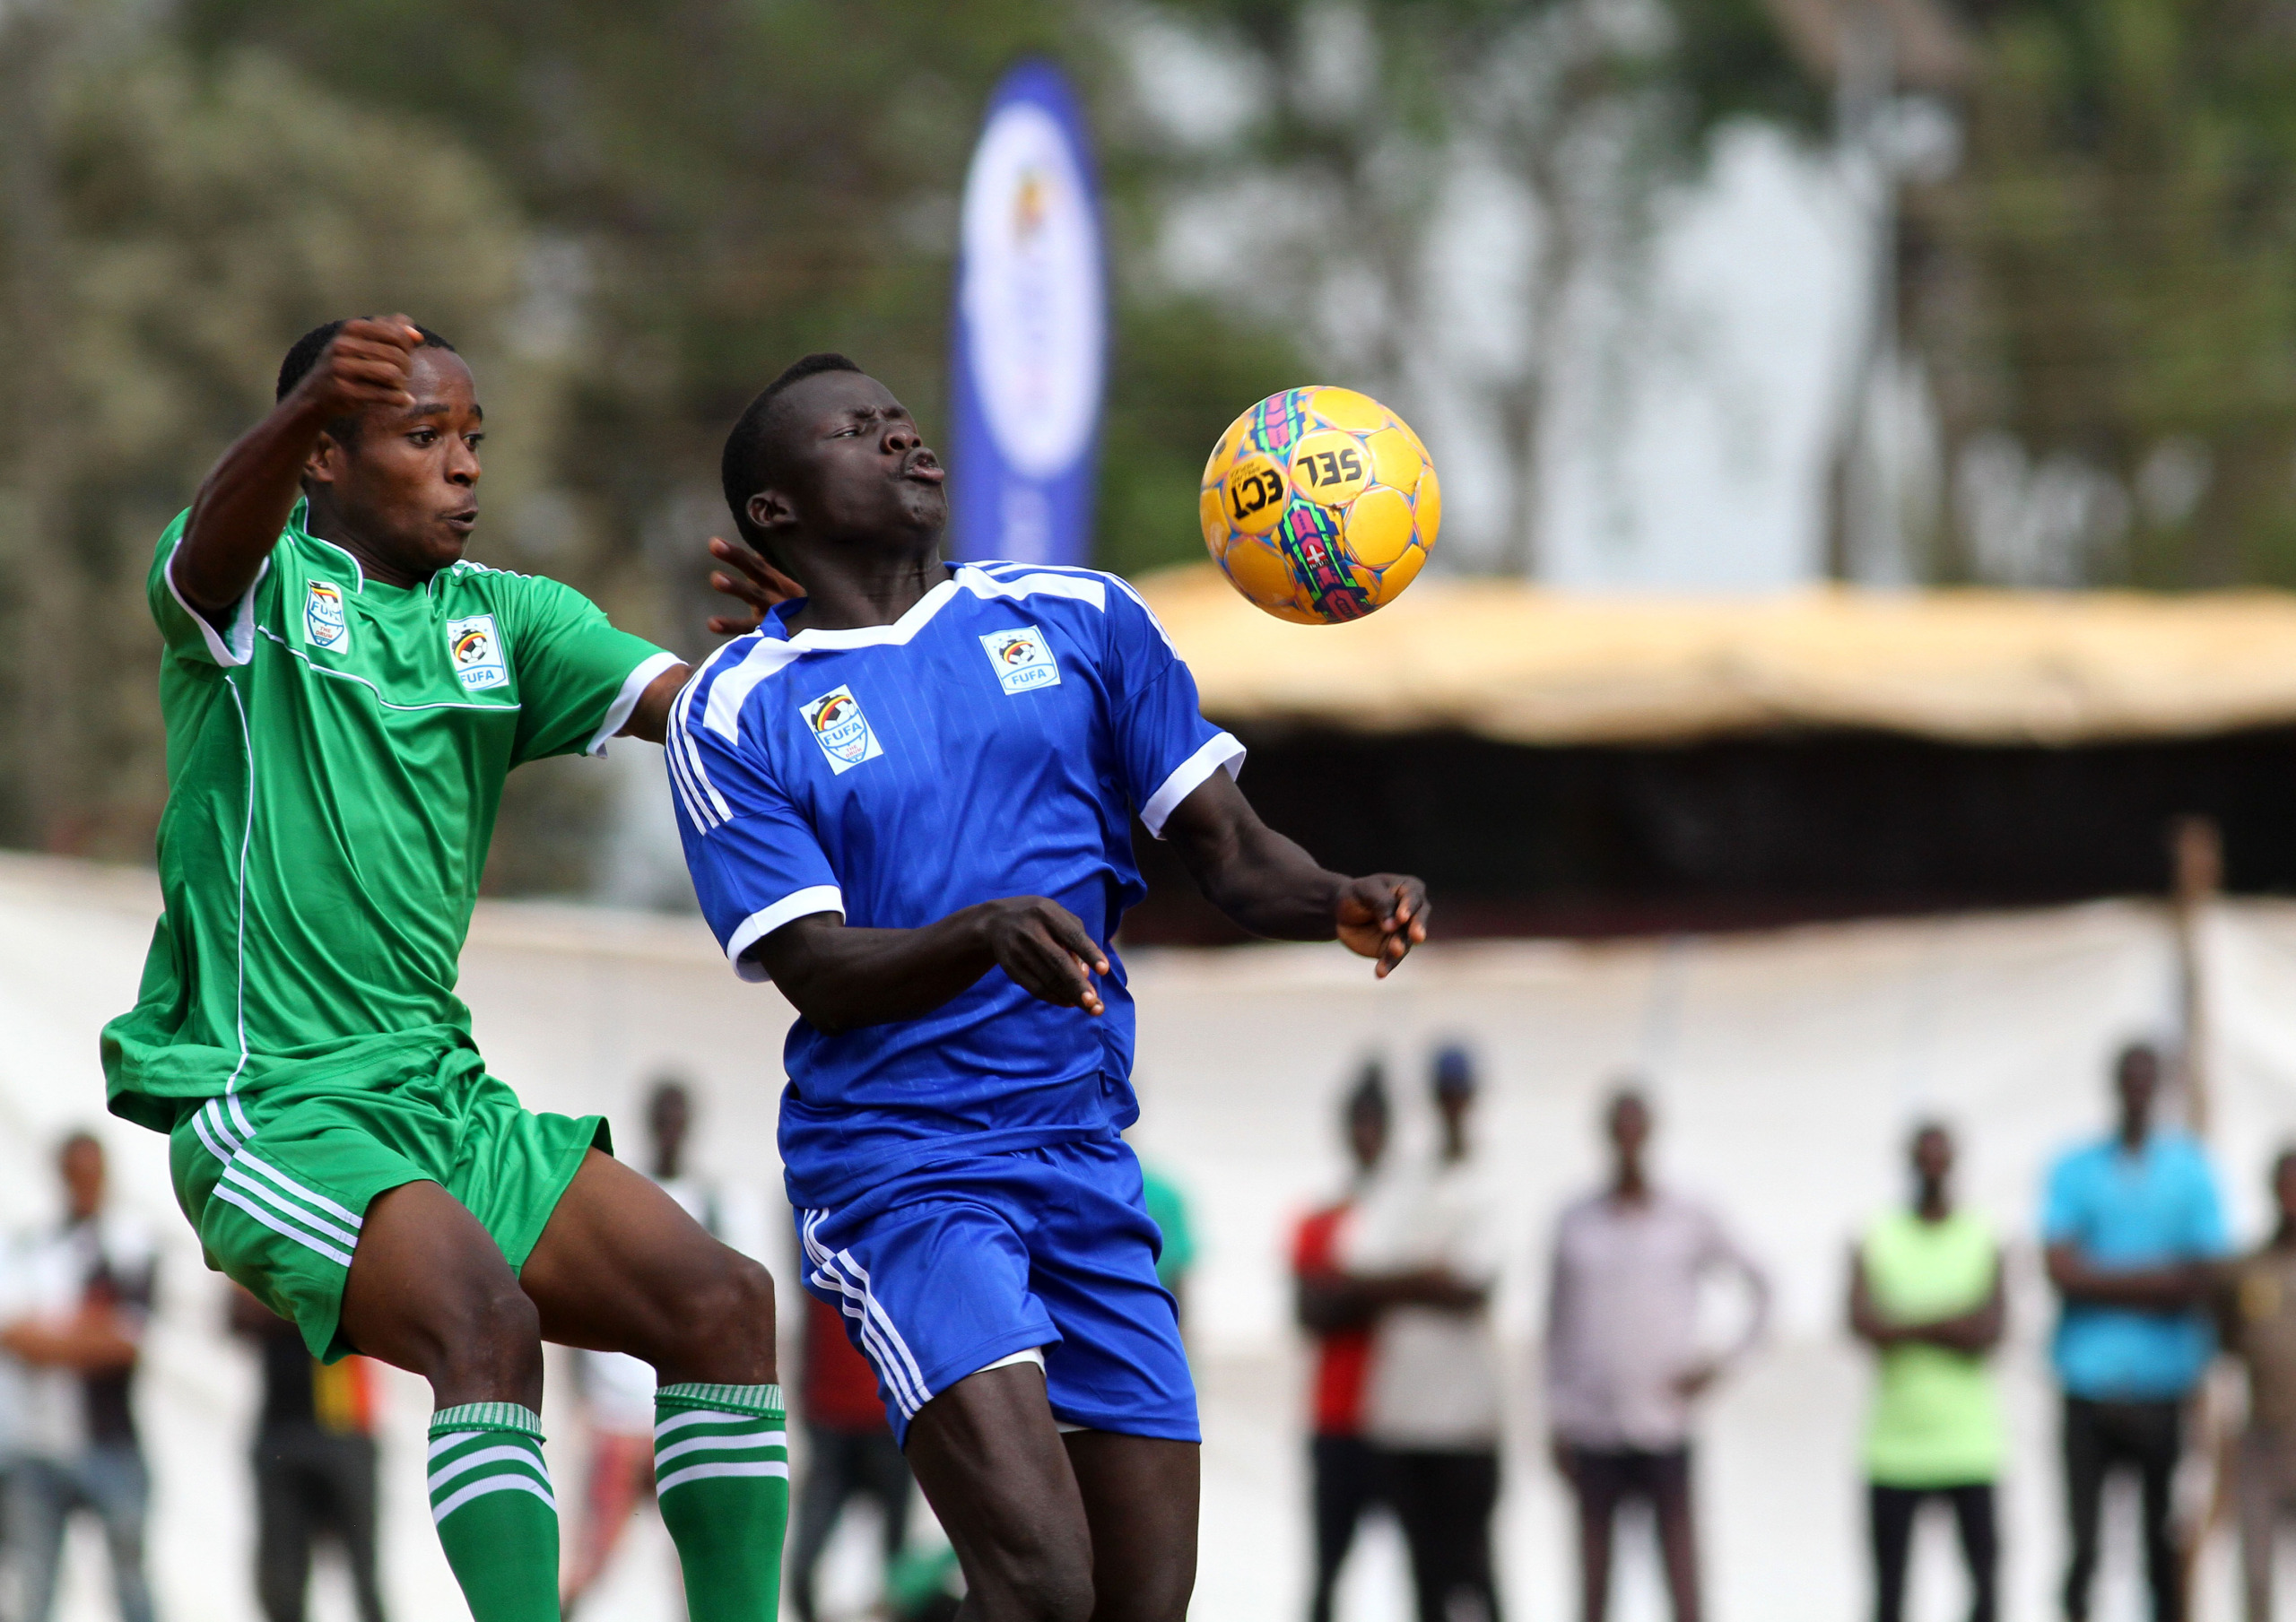 The FUFA Drum-Match Day 5: Points up for grabs as teams return for crucial stage